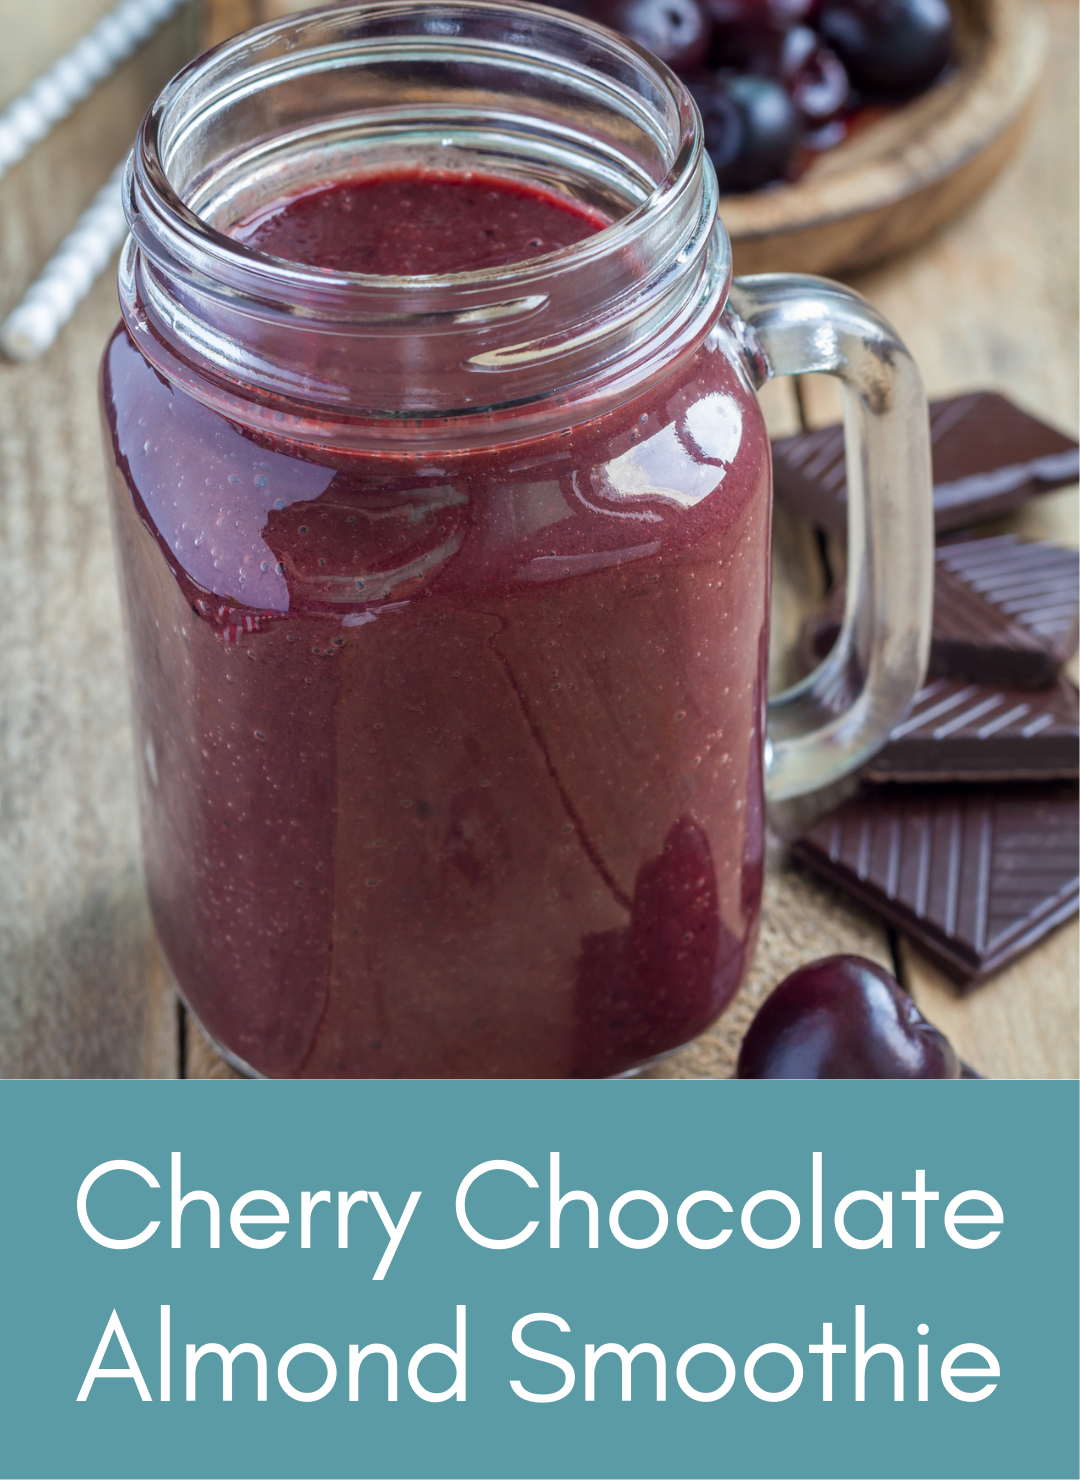 Cherry chocolate almond vegan smoothie Picture with link to recipe